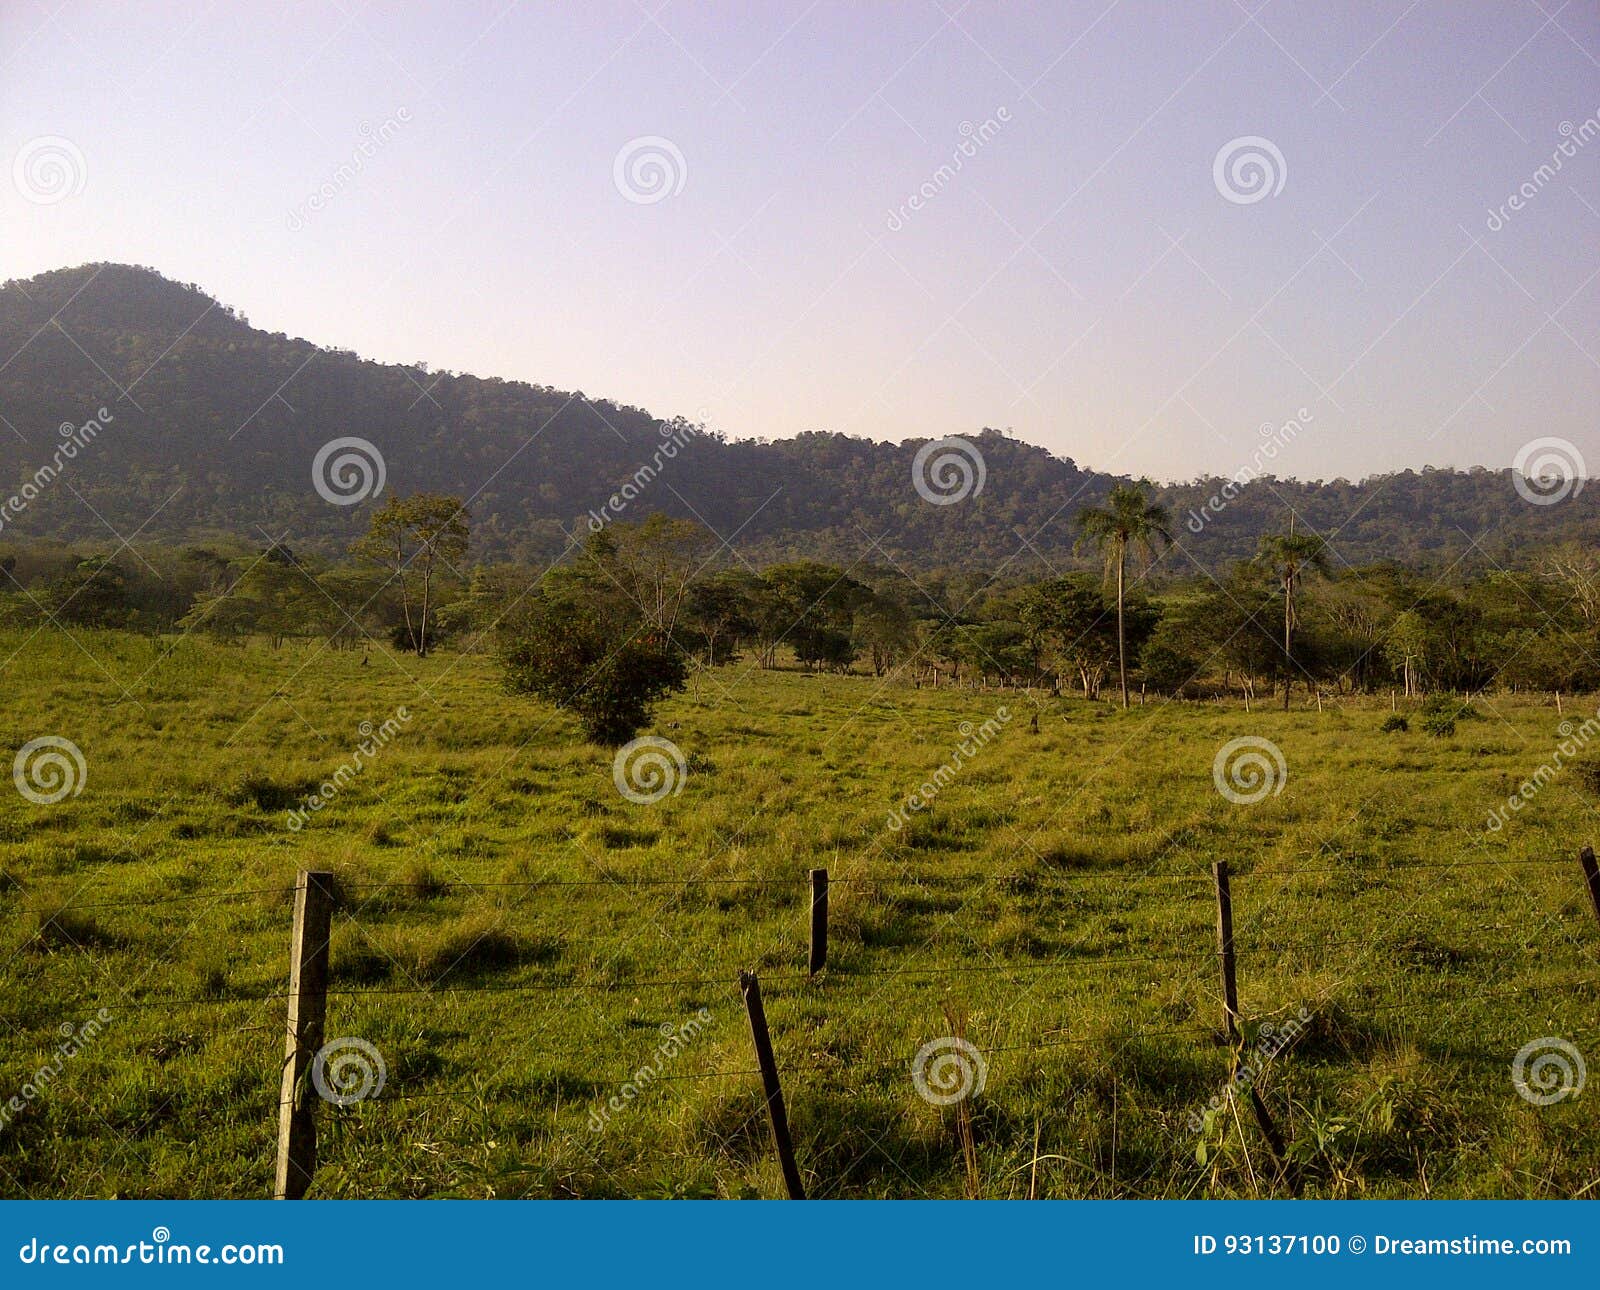 green field with mountains on the horizon, natural and warm environment